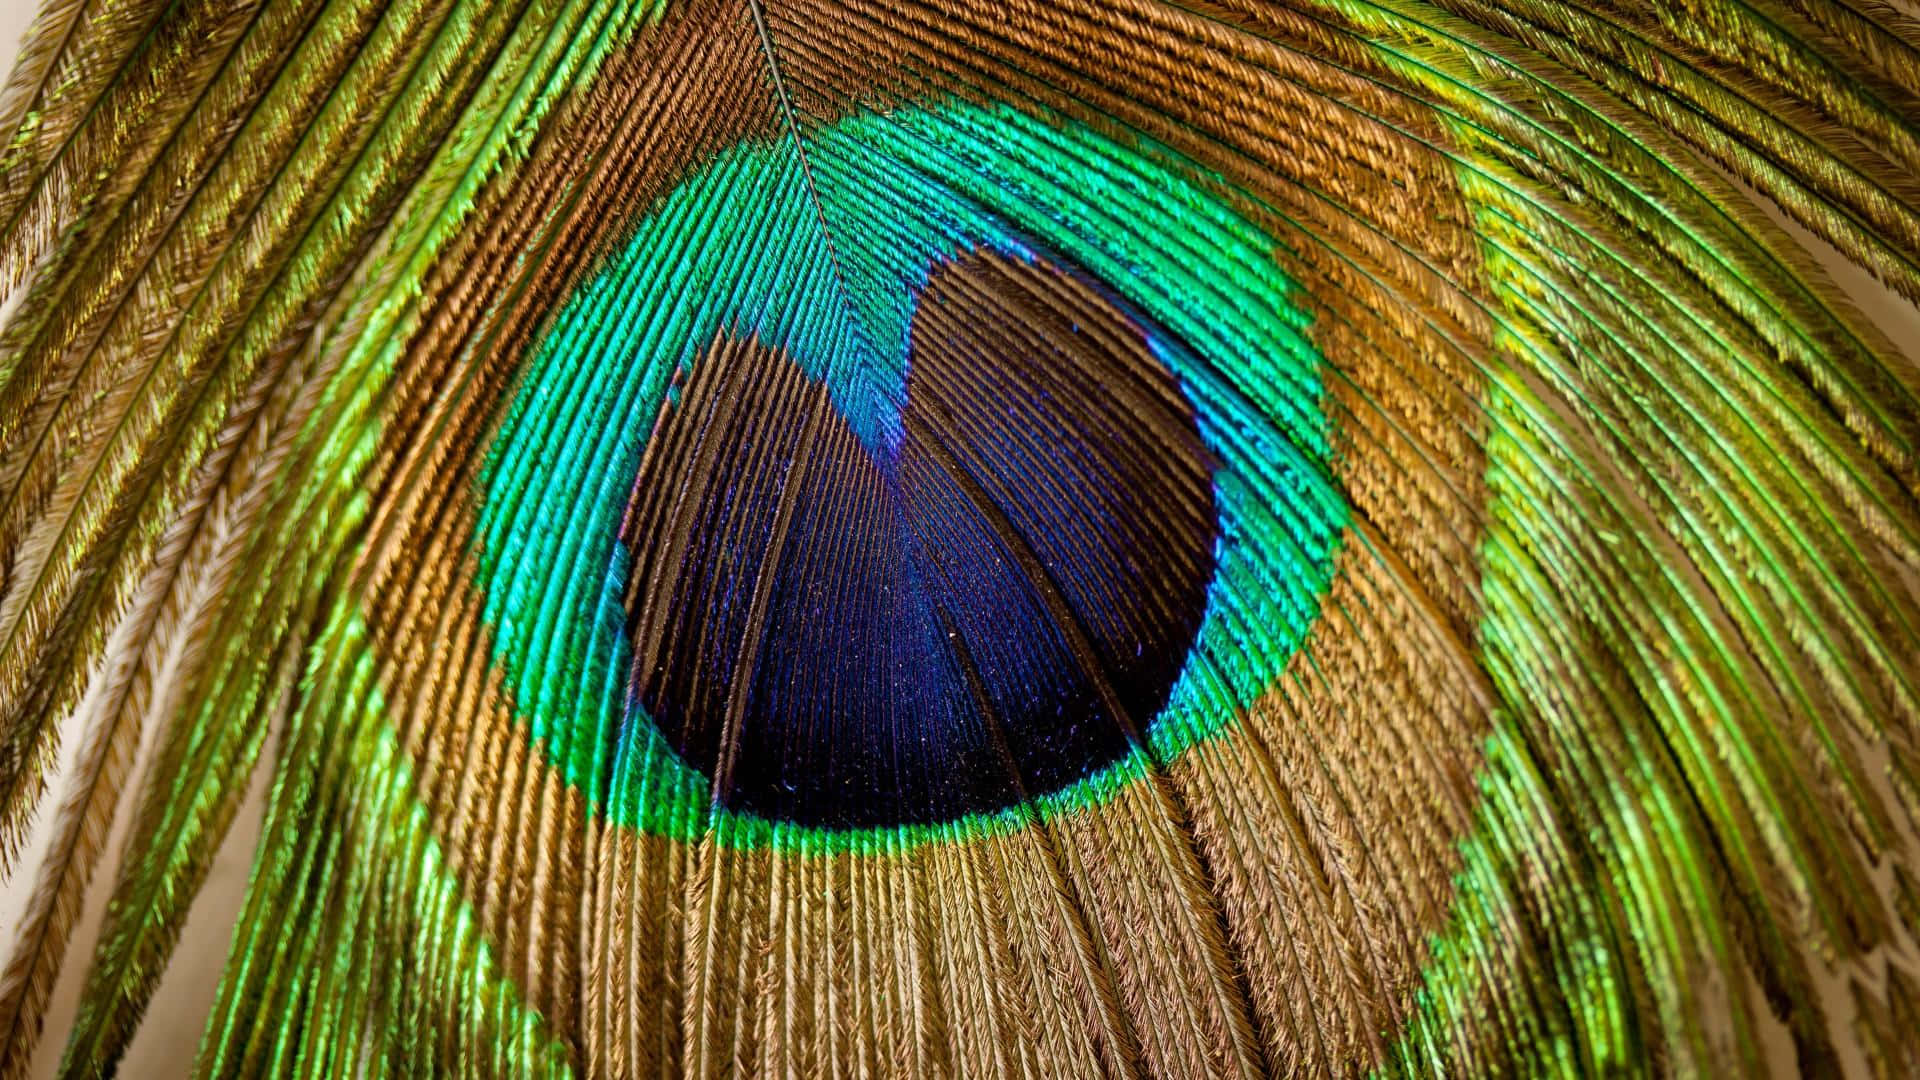 A beautiful peacock feather with intricate shades of blues and greens.